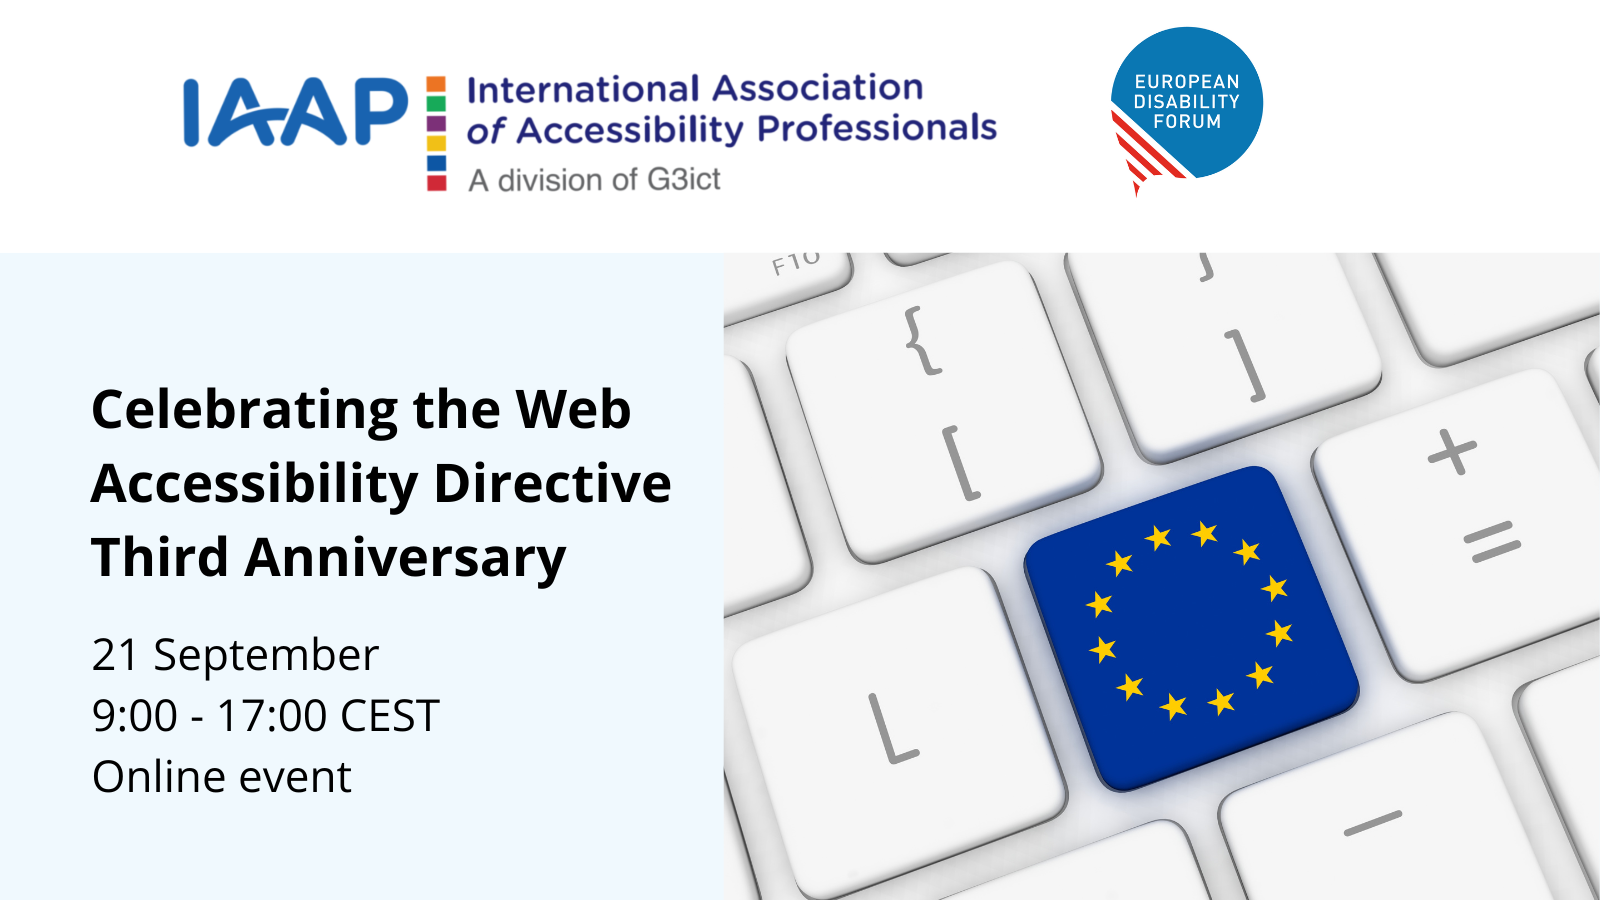 Celebrating the Web Accessibility Directive Third Anniversary